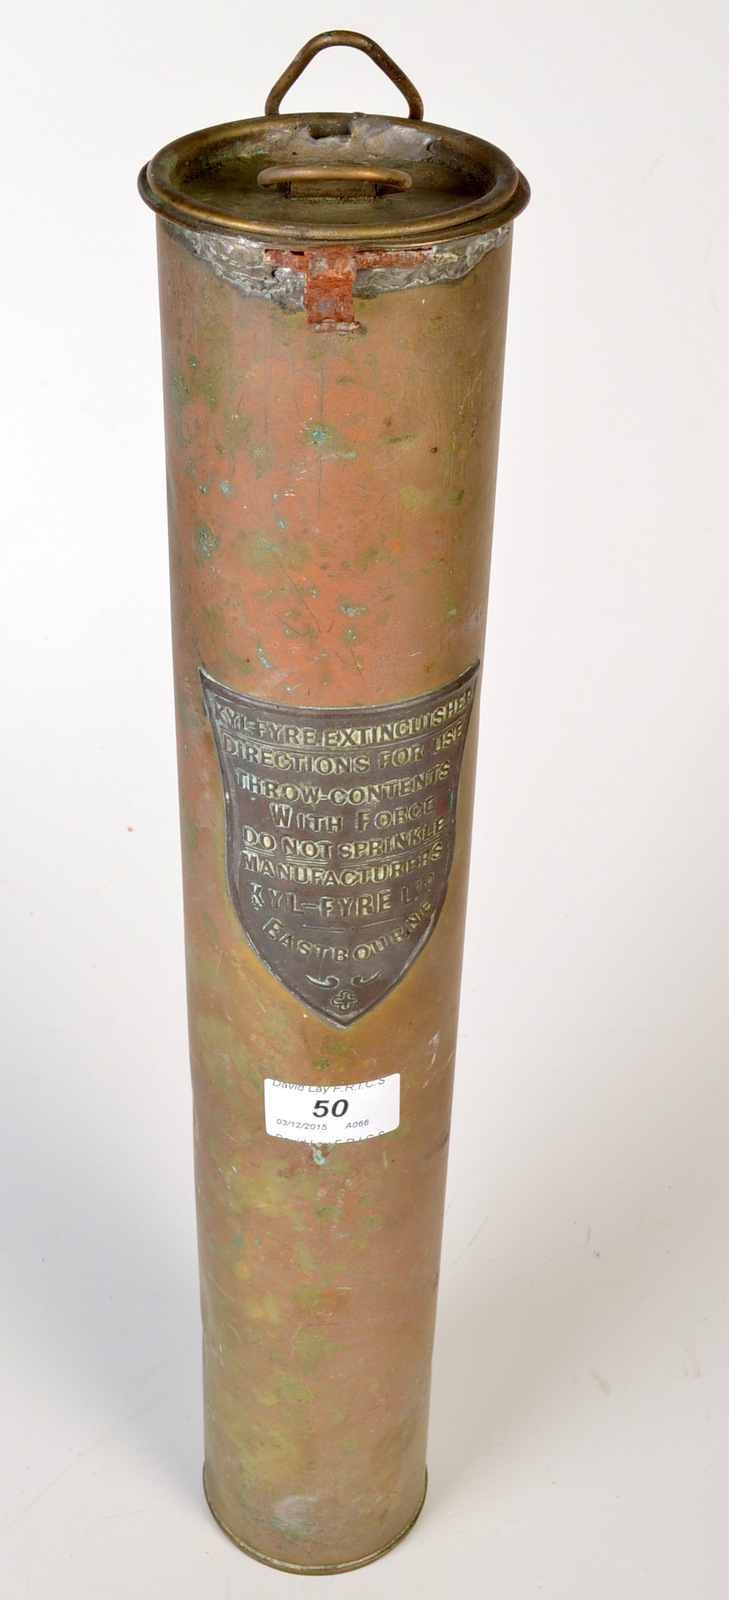 A early 20th century Kyl-Fyre extinguisher,